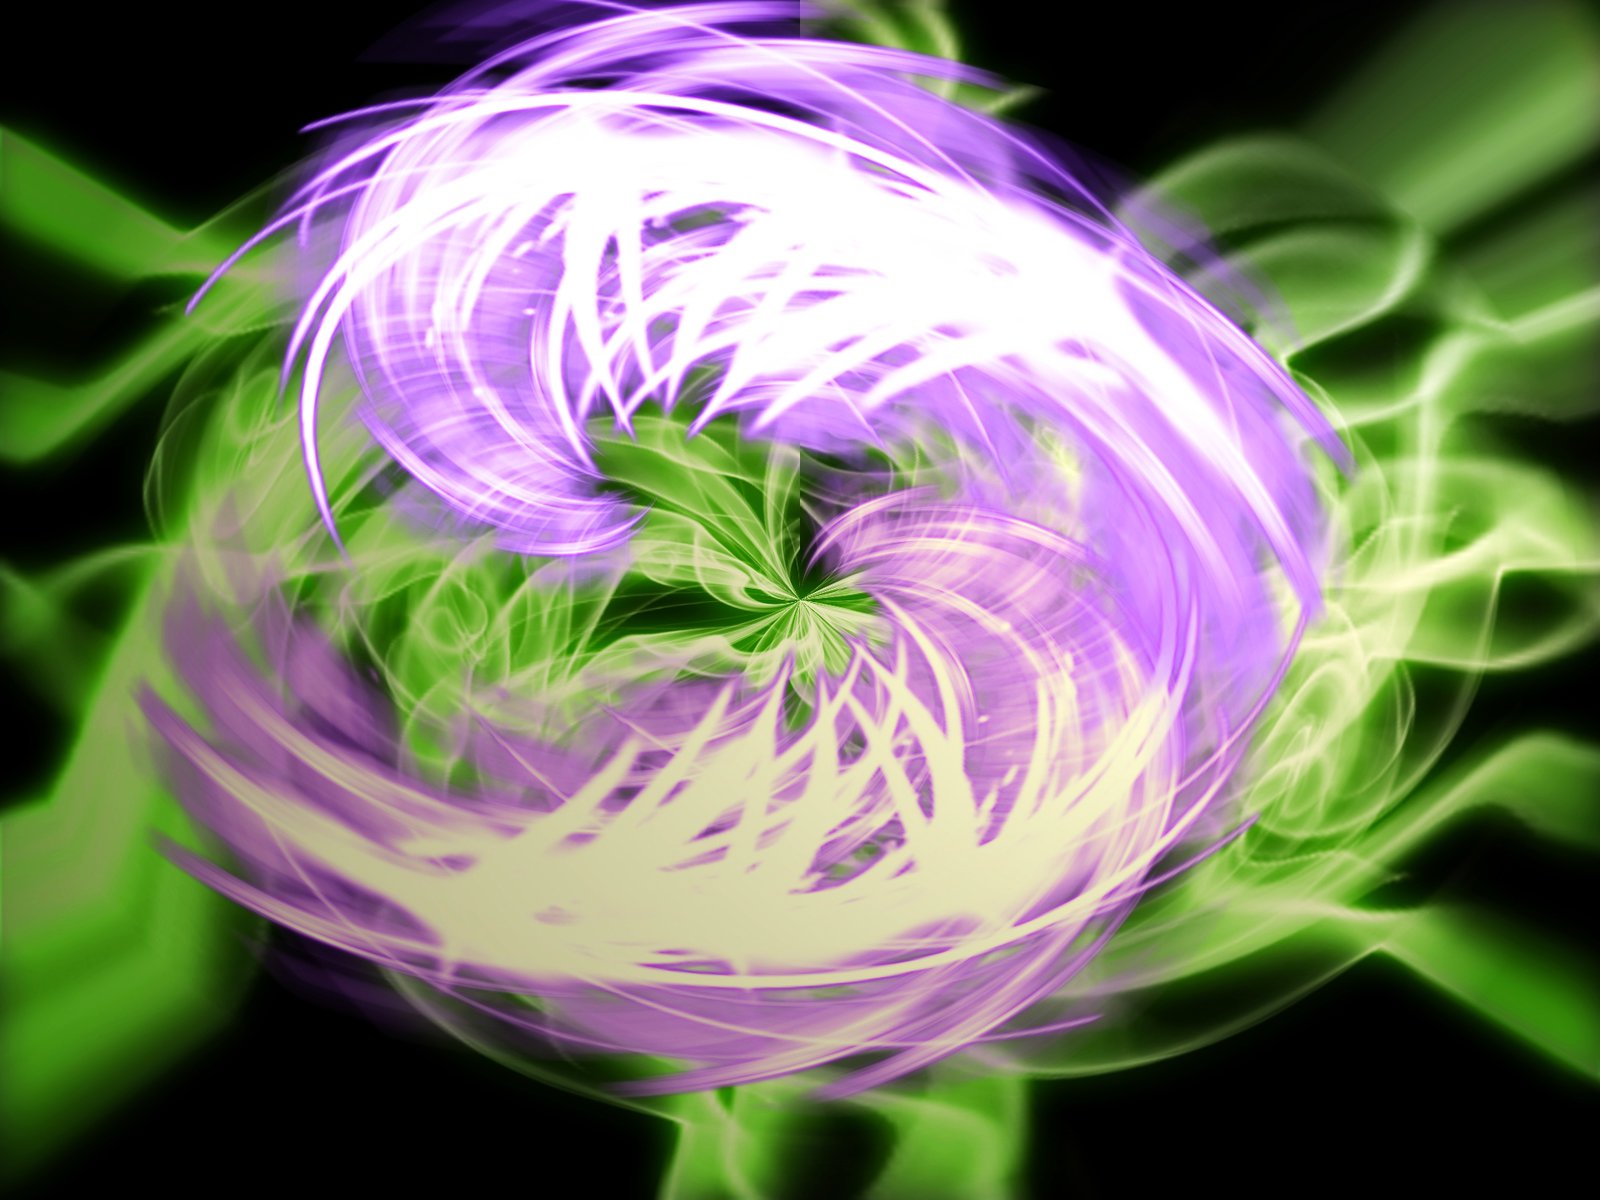 Abstract Green and Purple Smoke Background by ItarildeIsilra on